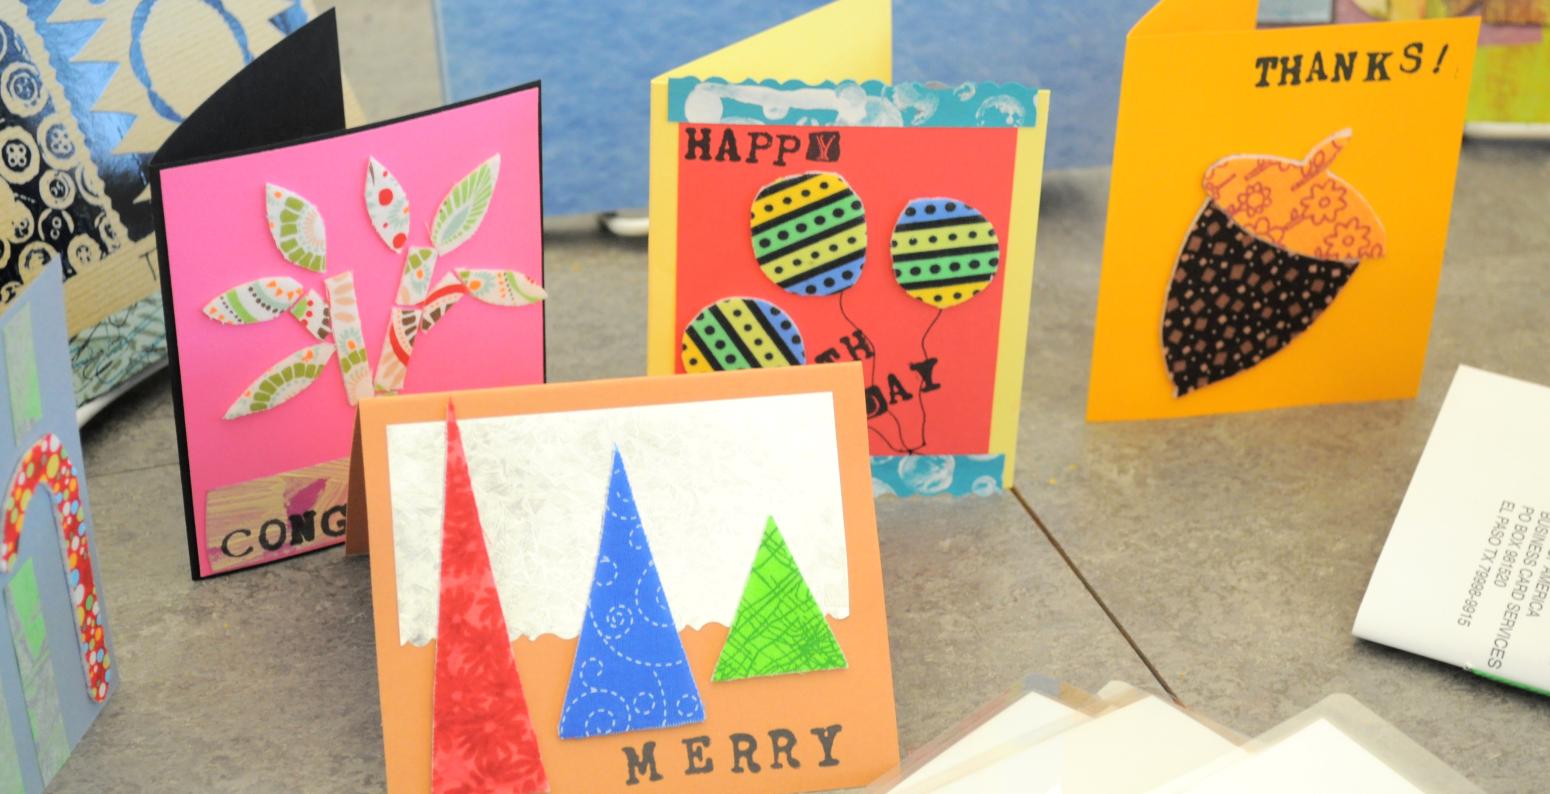 Four handmade cards, each for a different occasion: thank you, merry Christmas, happy birthday, and congratulations.